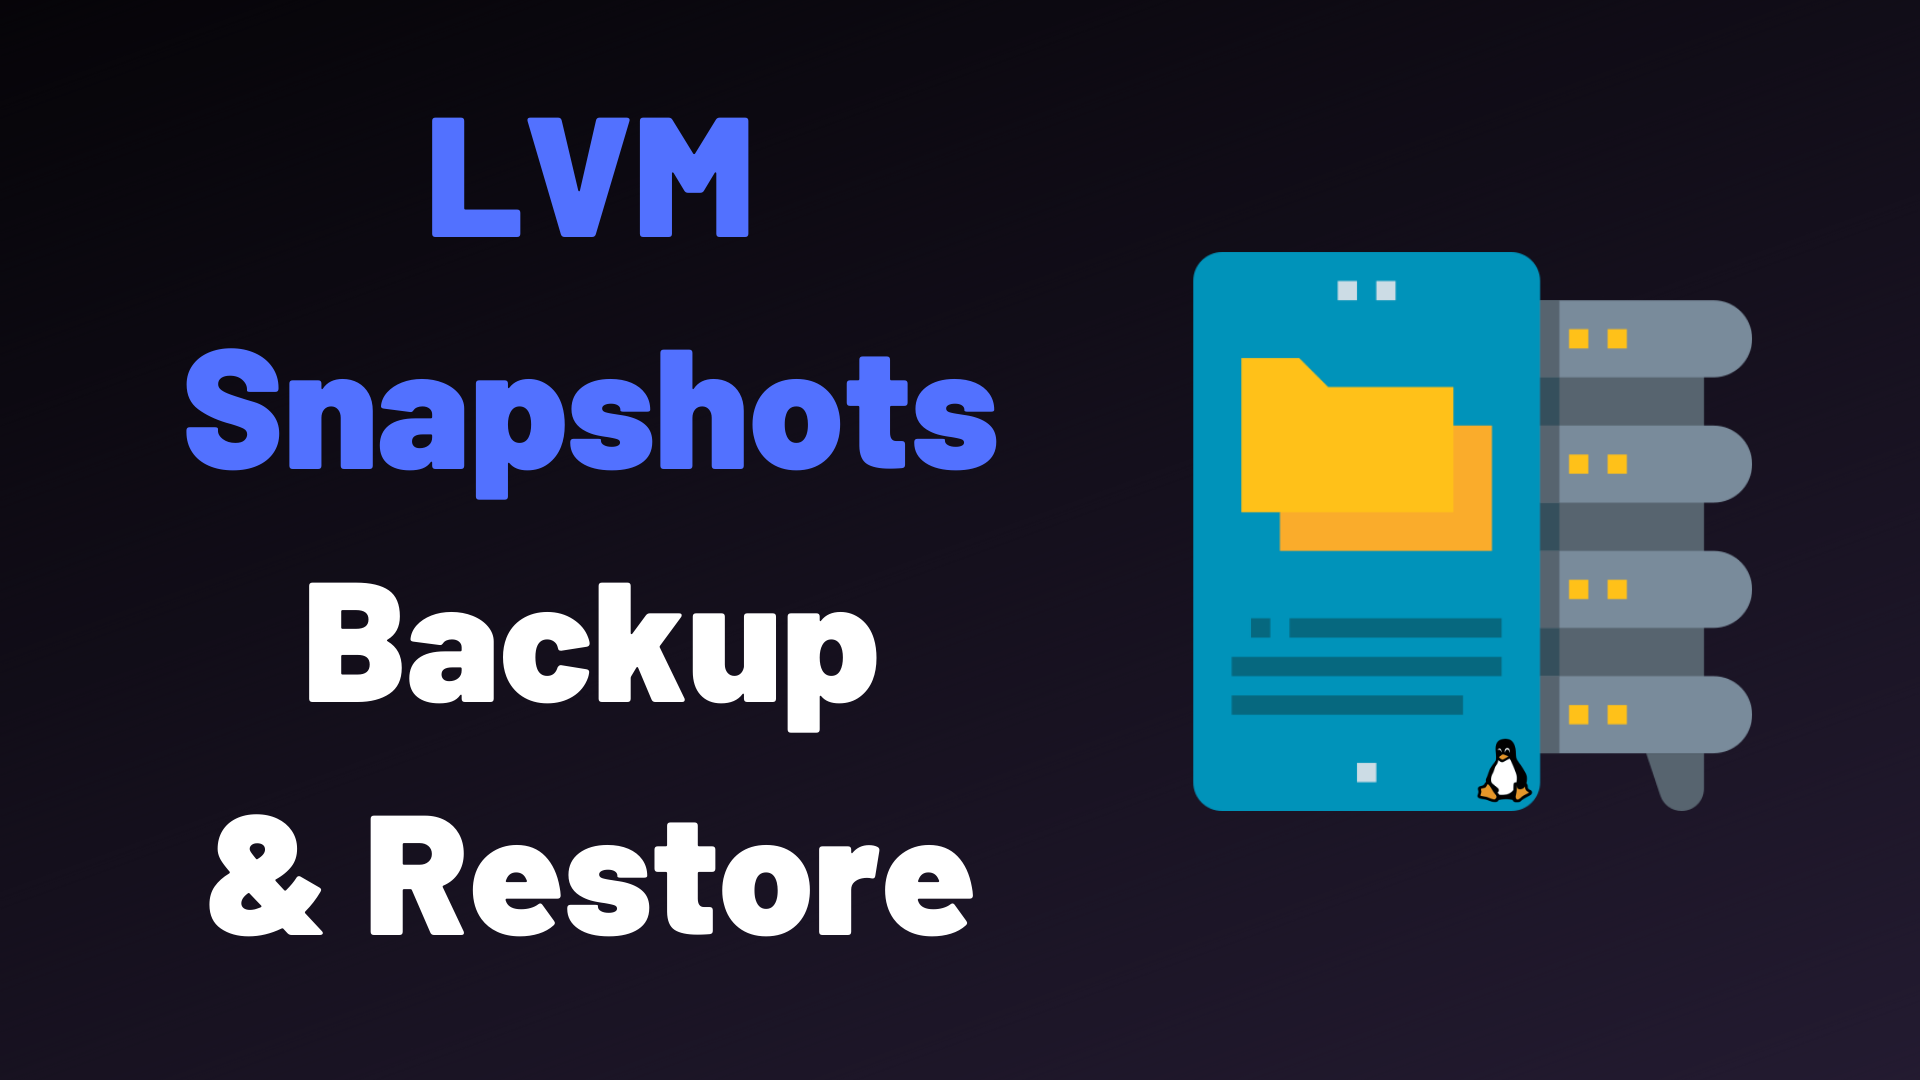 LVM Snapshots Backup and Restore on Linux